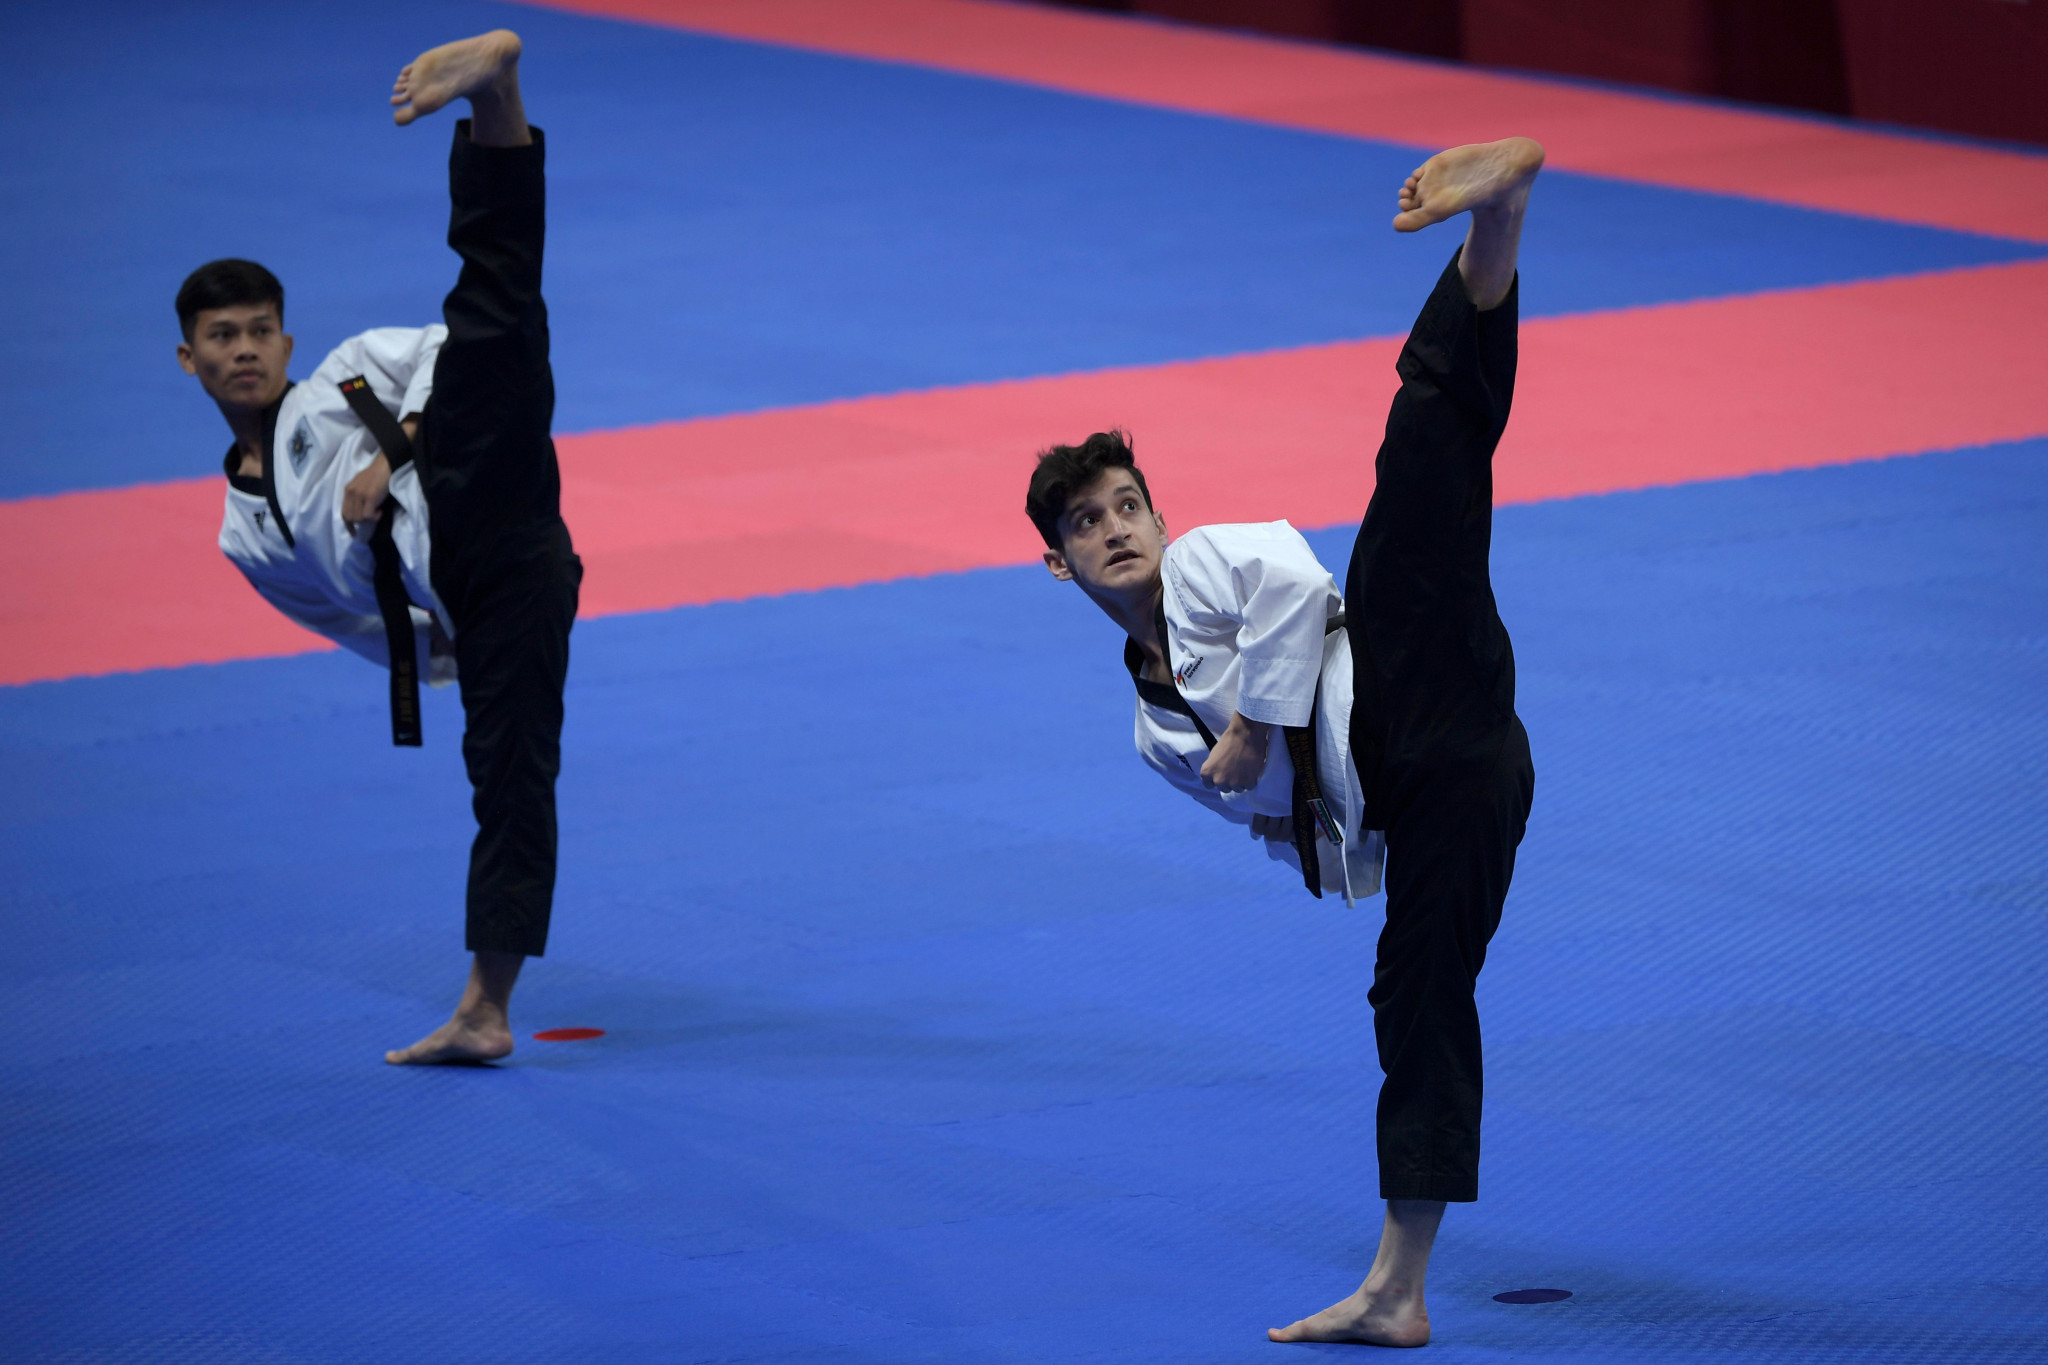 Poomsae was contested at the 2018 Asian Games in Jakarta, Indonesia ©Getty Images